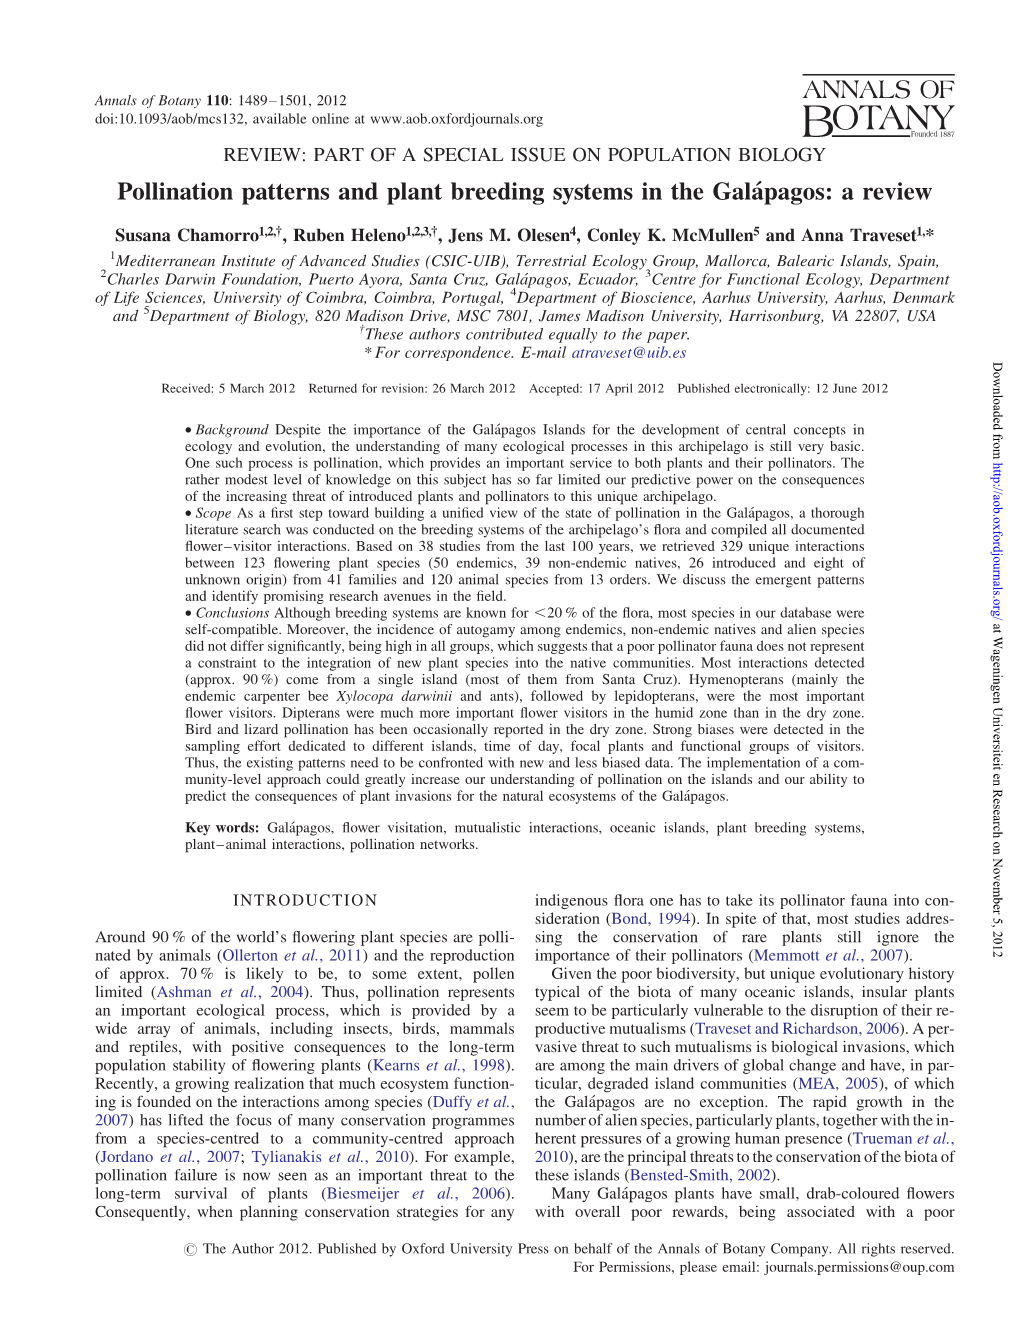 Pollination Patterns and Plant Breeding Systems in the Galápagos